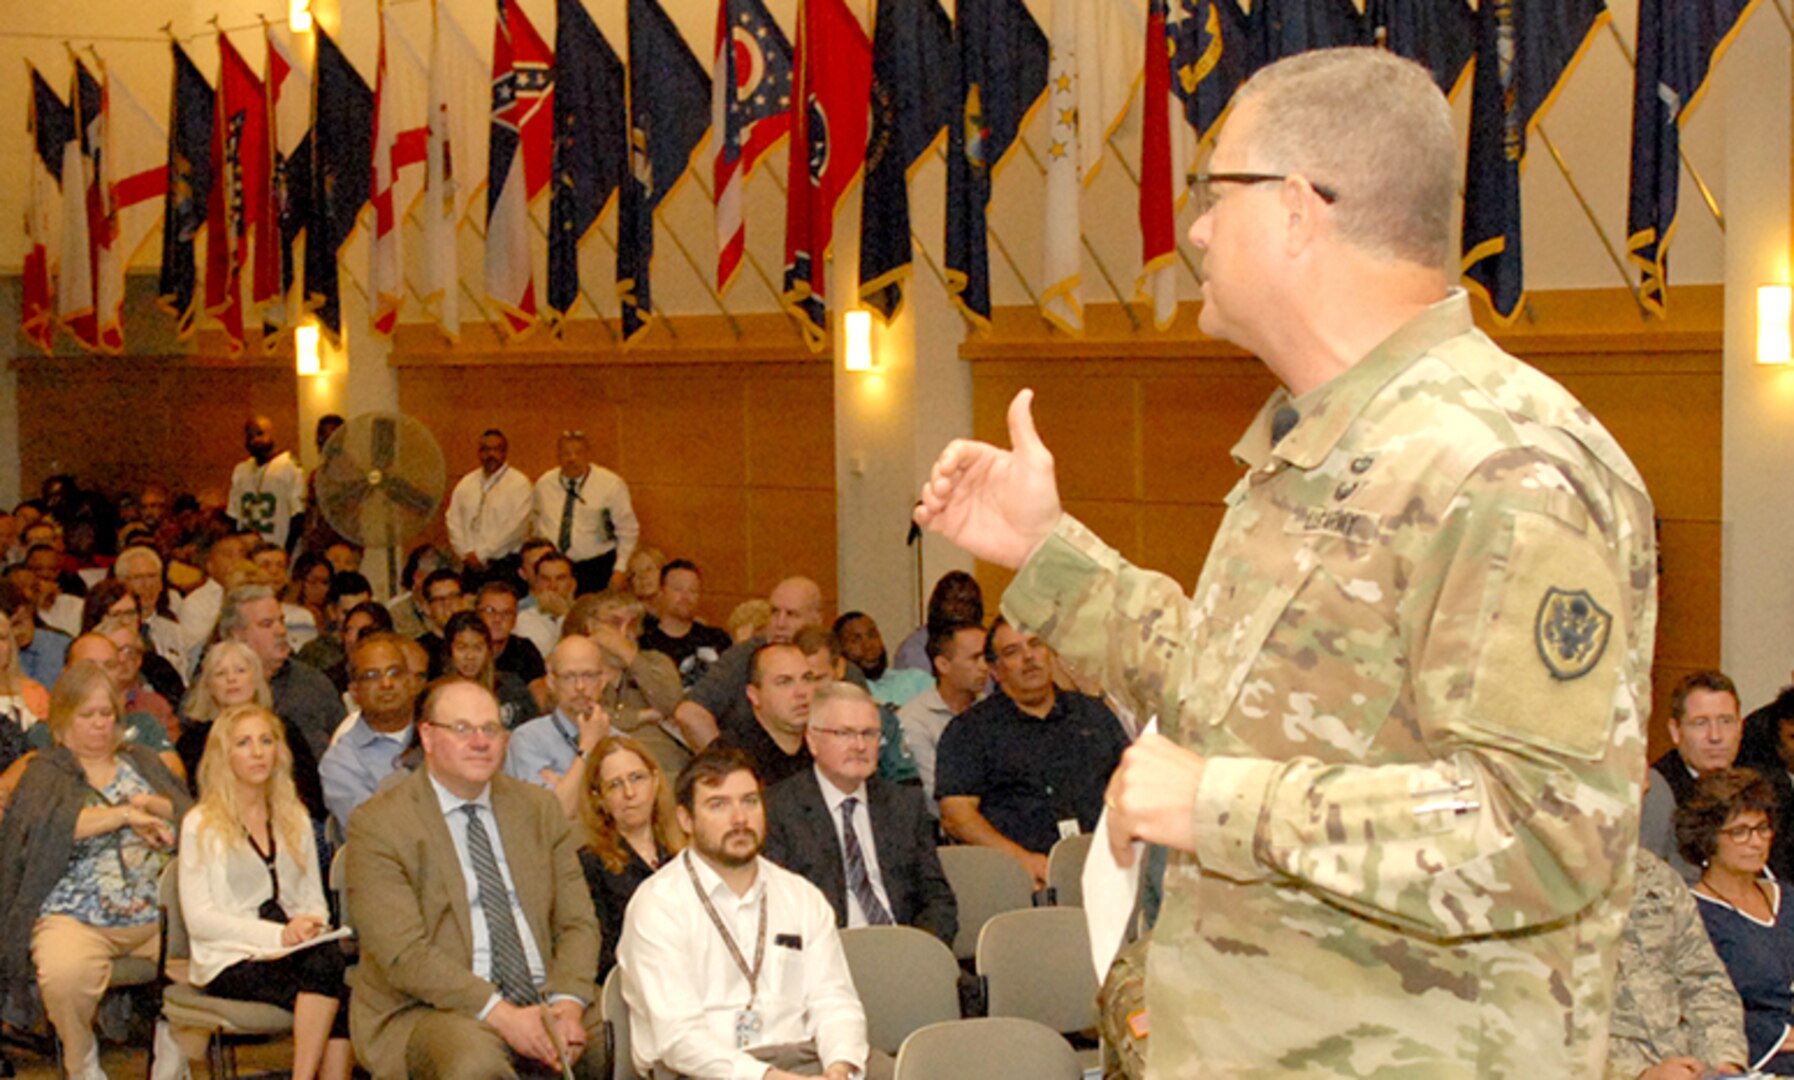 DLA Troop Support Commander Army Brig. Gen. Mark Simerly addresses the workforce at a town hall event Sept. 6 in Philadelphia.